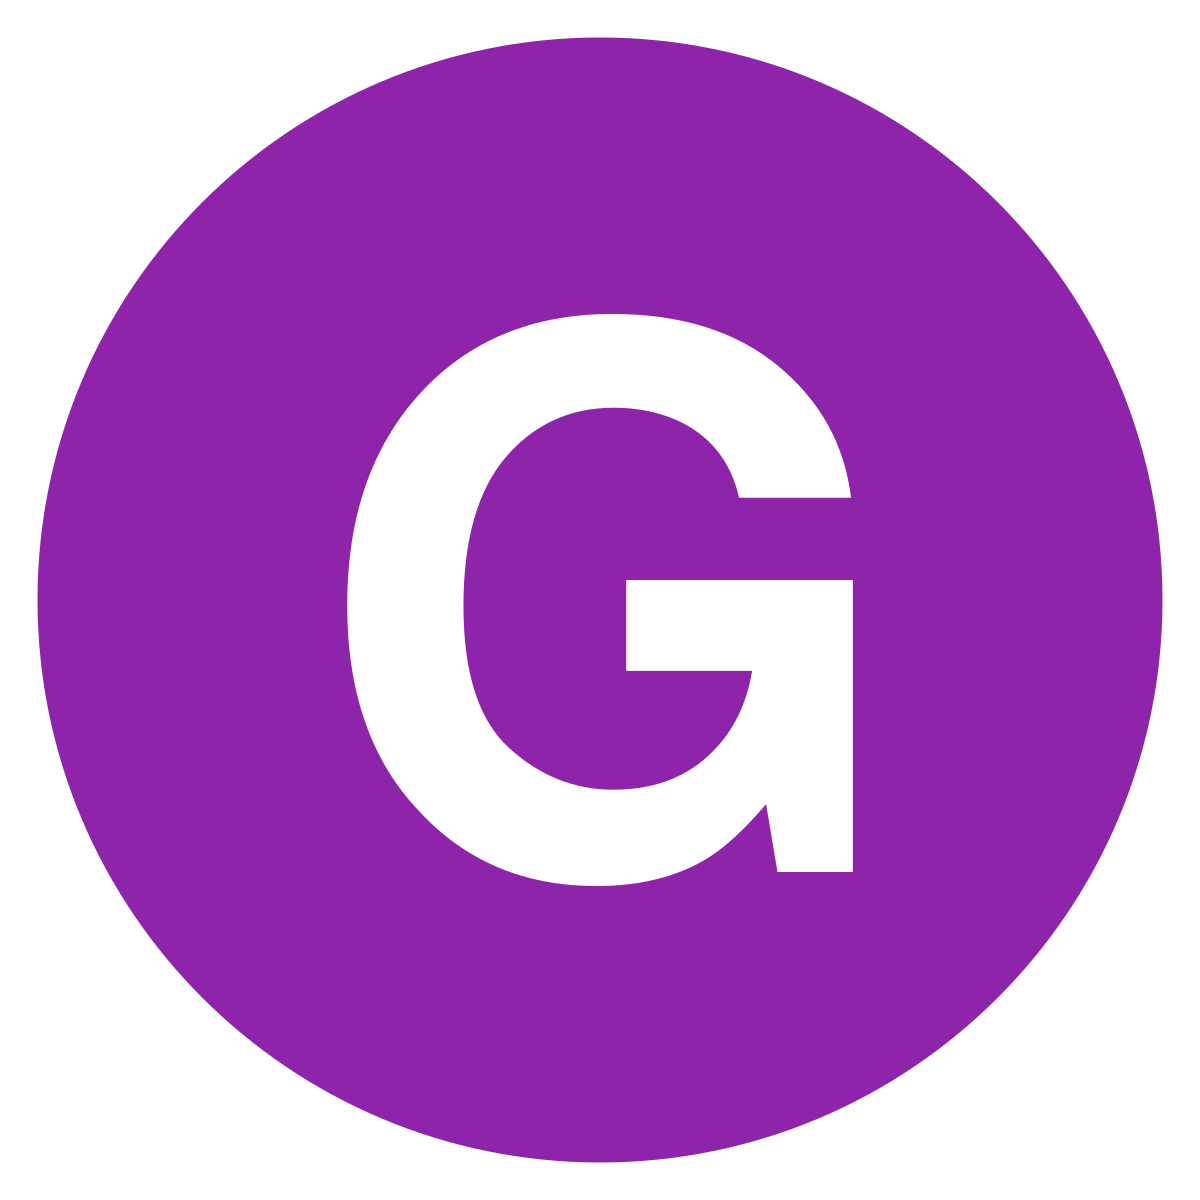 Download File:Eo circle purple letter-g.svg - Wikimedia Commons